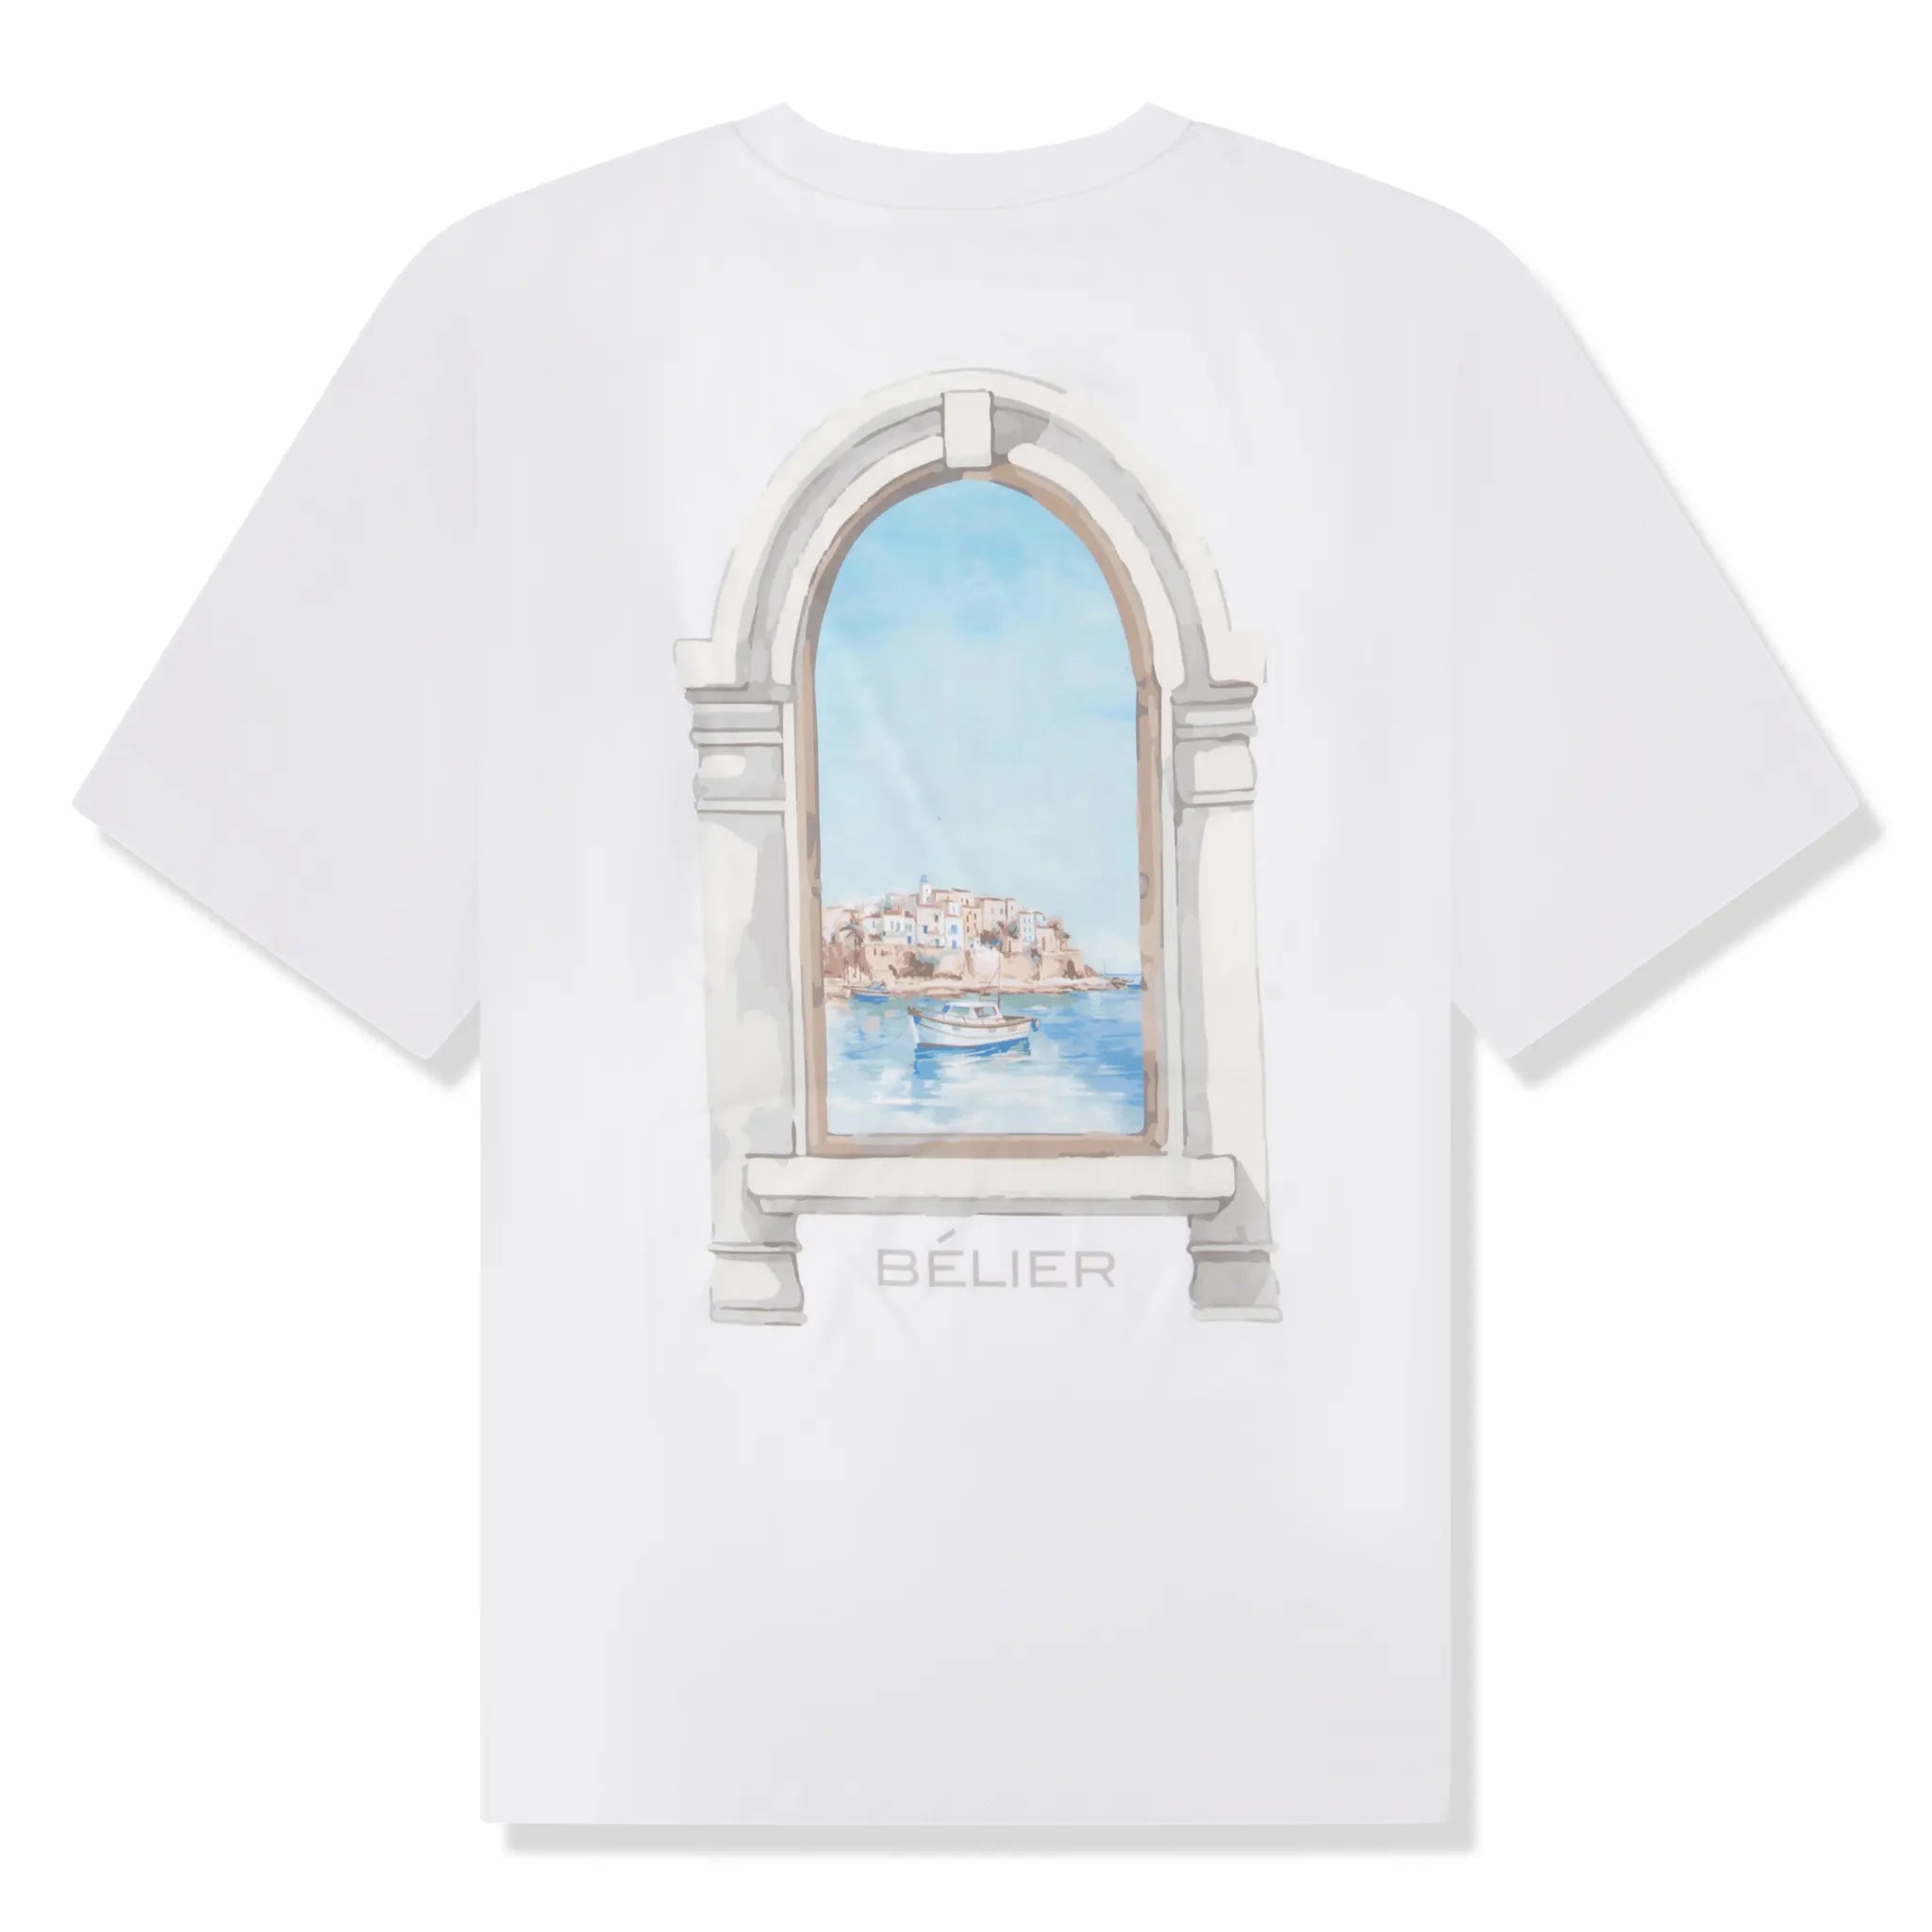 Back view of Belier Arch View White T Shirt BM-214